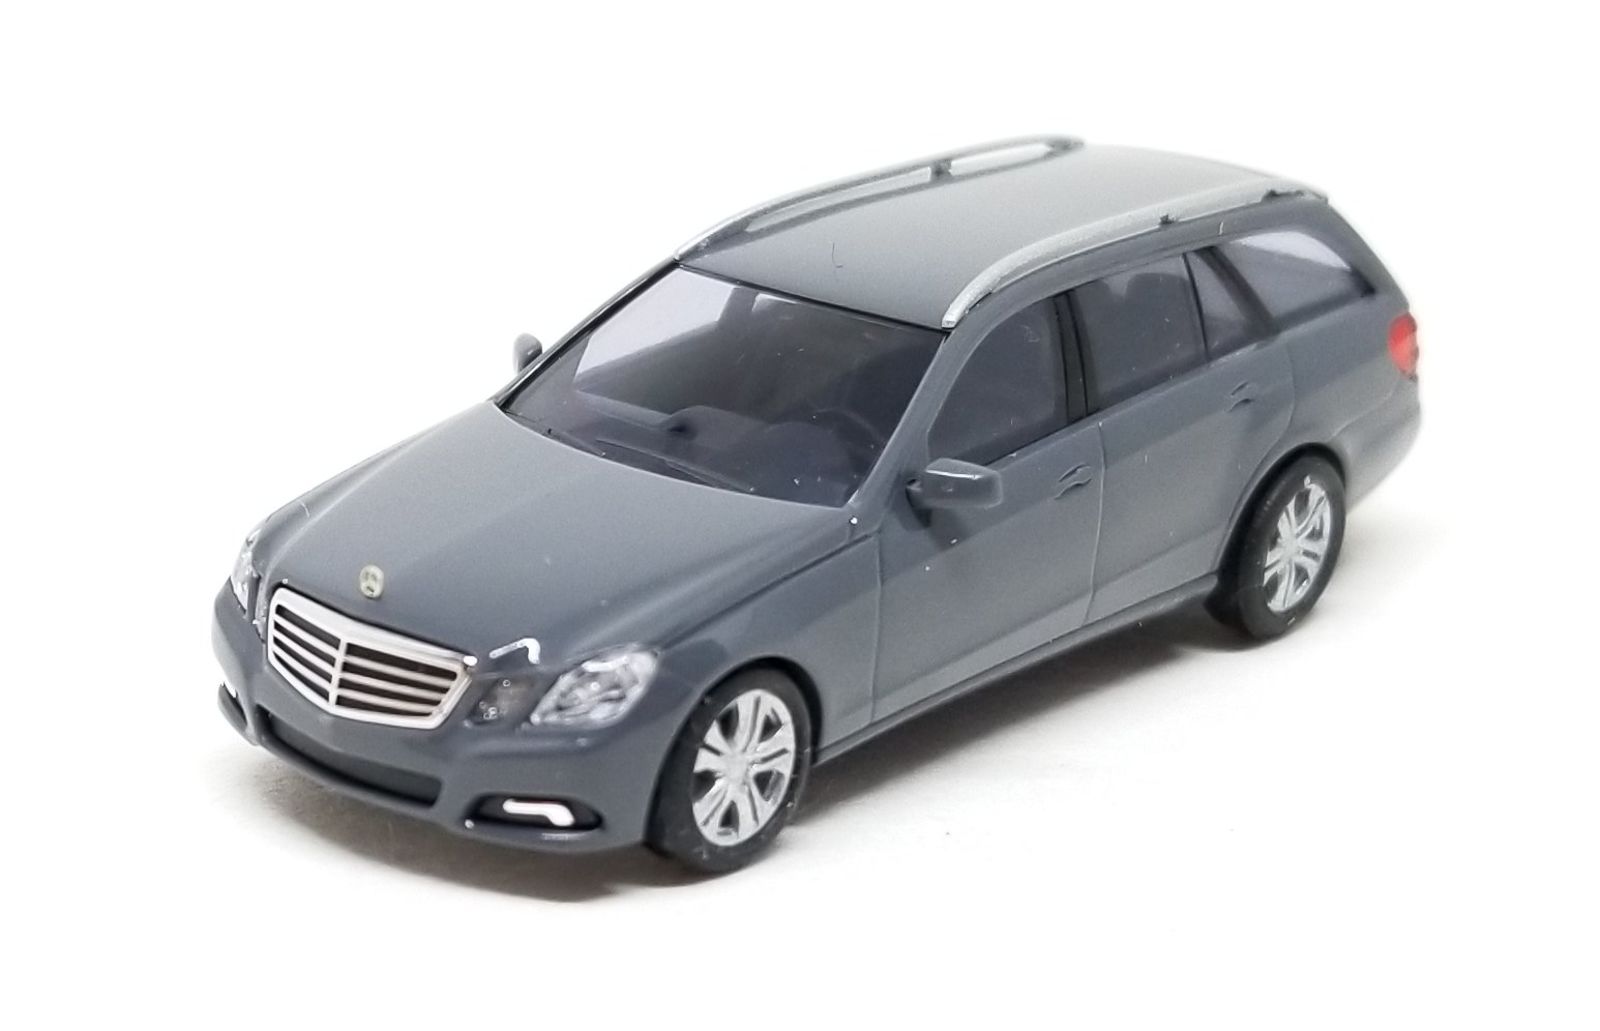 Illustration for article titled Surprise Saturday: Busch HO Scale Mercedes-Benz E-Class Wagon